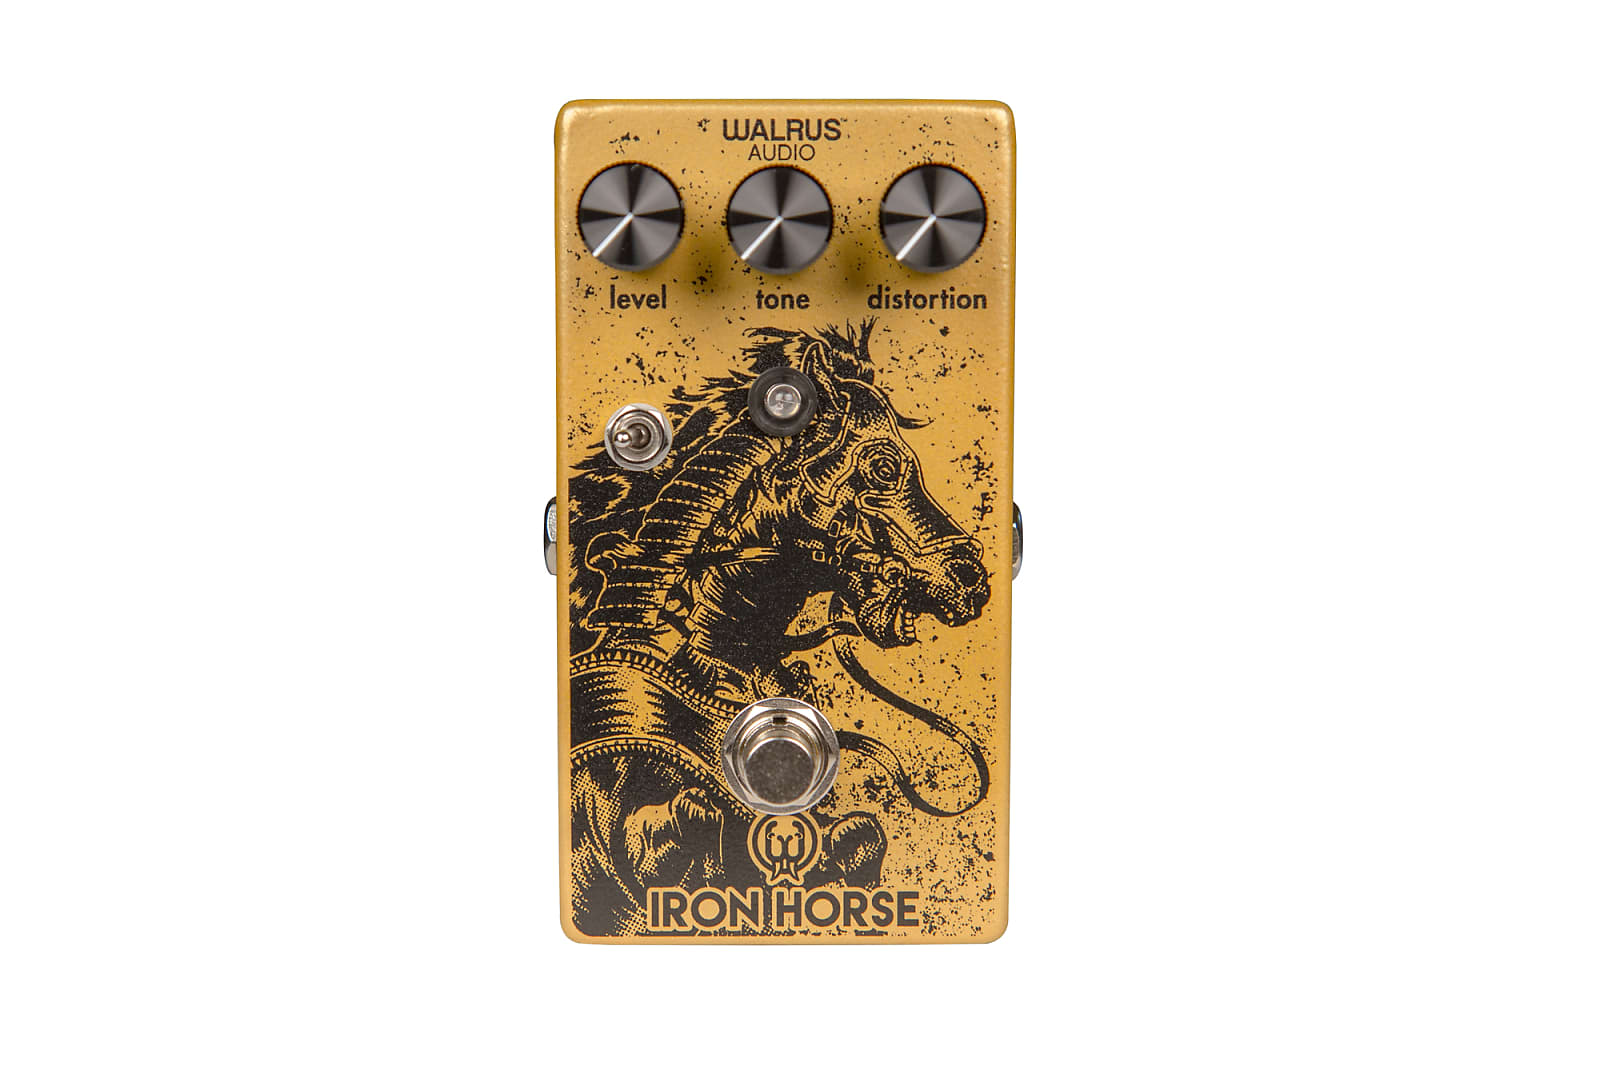 Walrus Audio Iron Horse V2 LM308 Distortion Effects Pedal